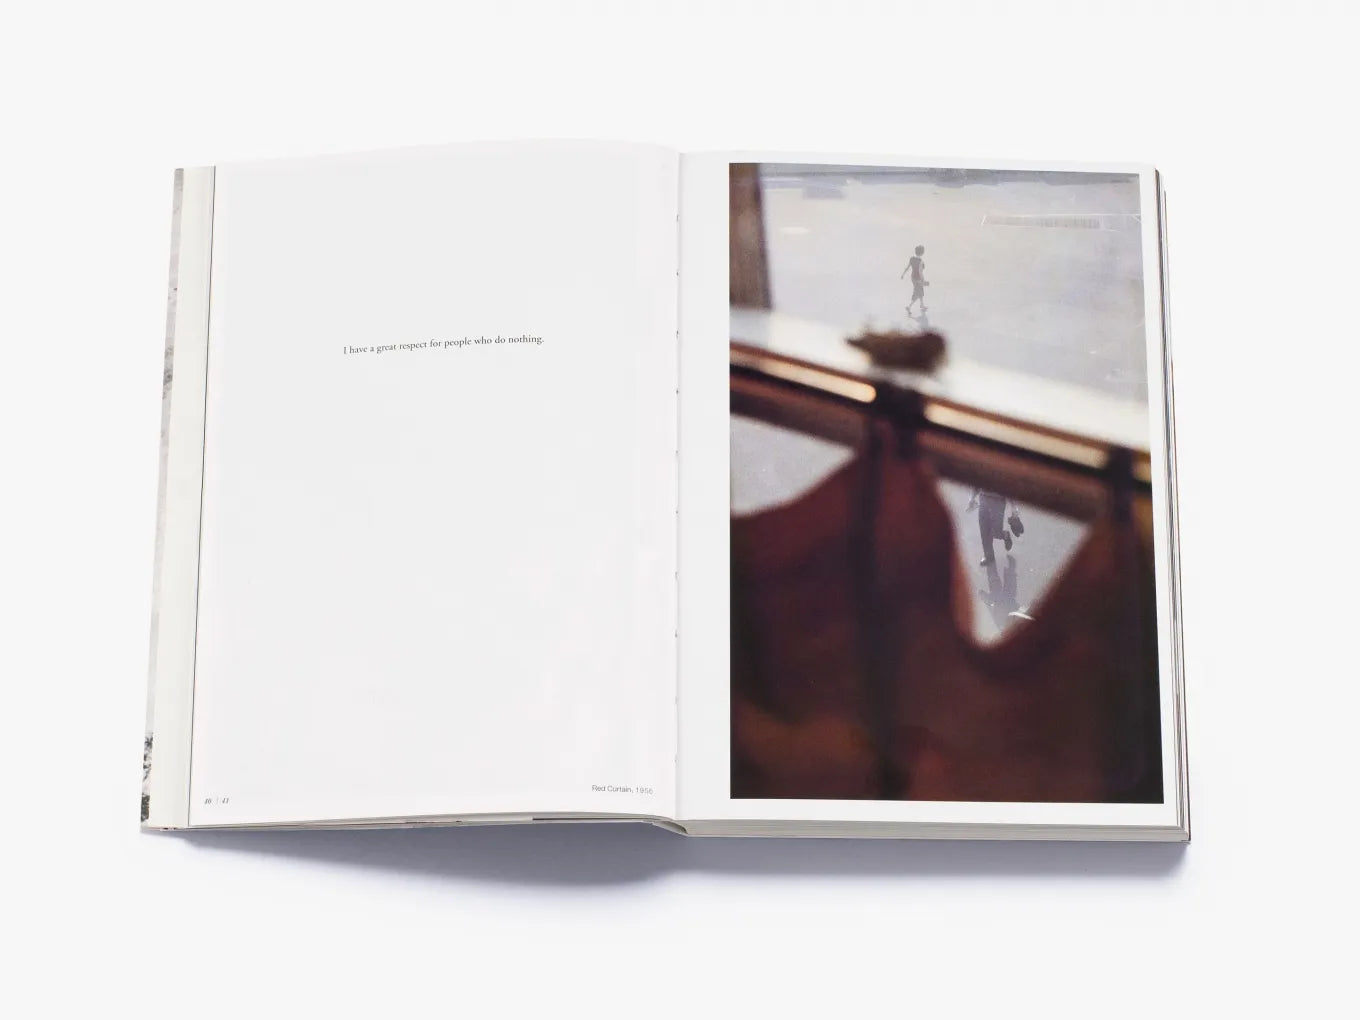 All About Saul Leiter by Saul Leiter